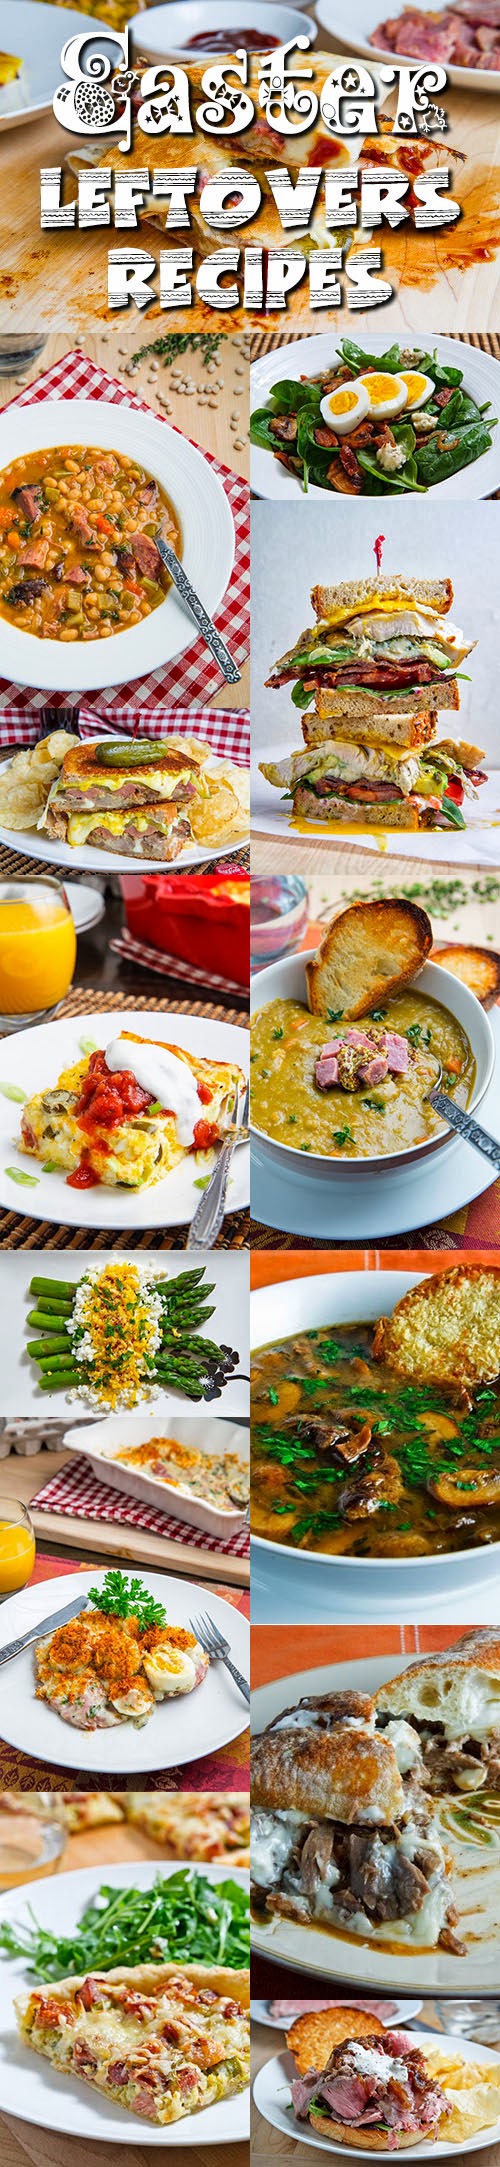 Easter Leftovers Recipes